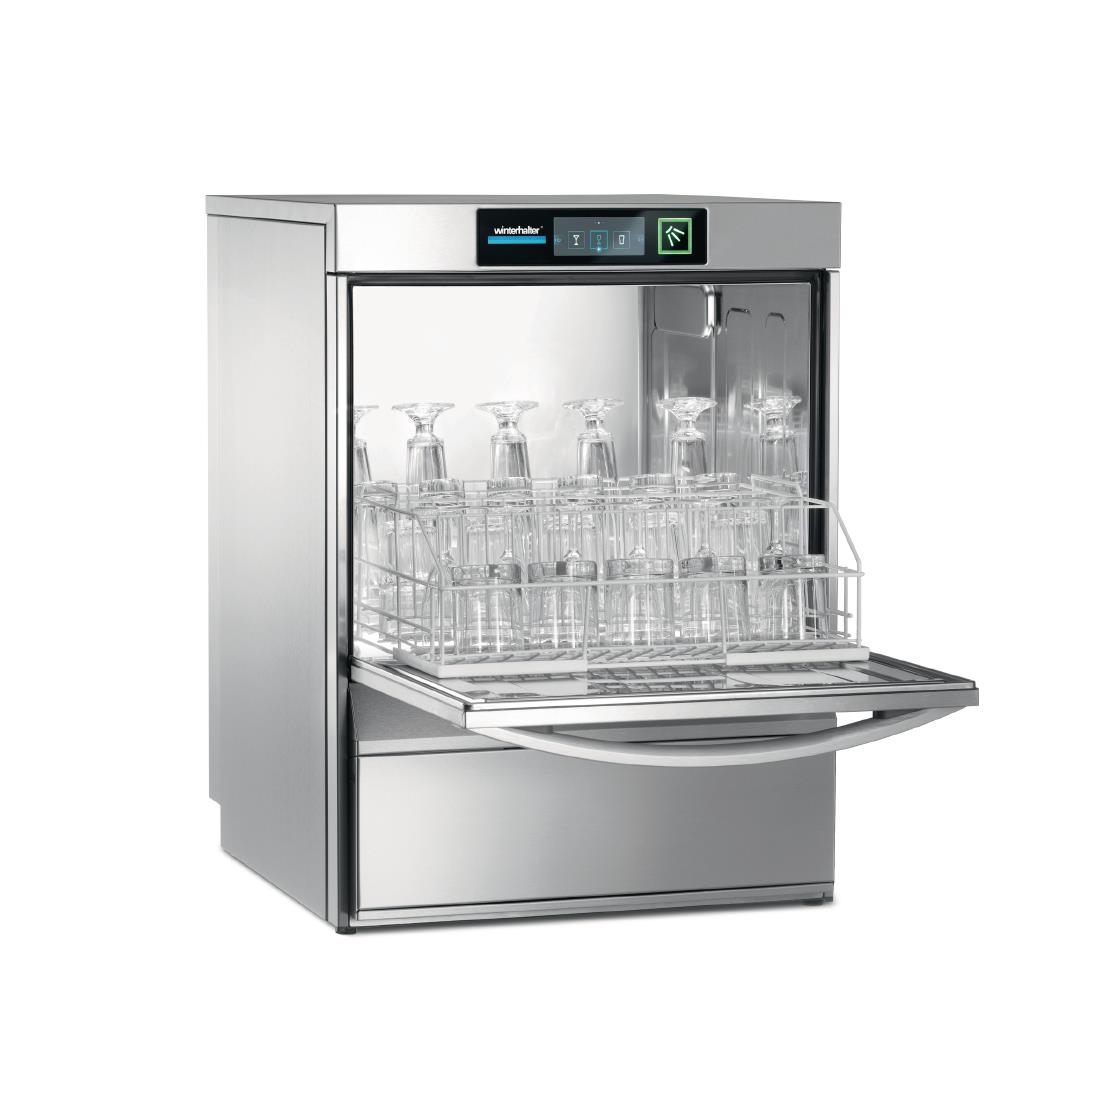 Winterhalter Undercounter Glasswasher UC-XL-E Cool Rinse with Install